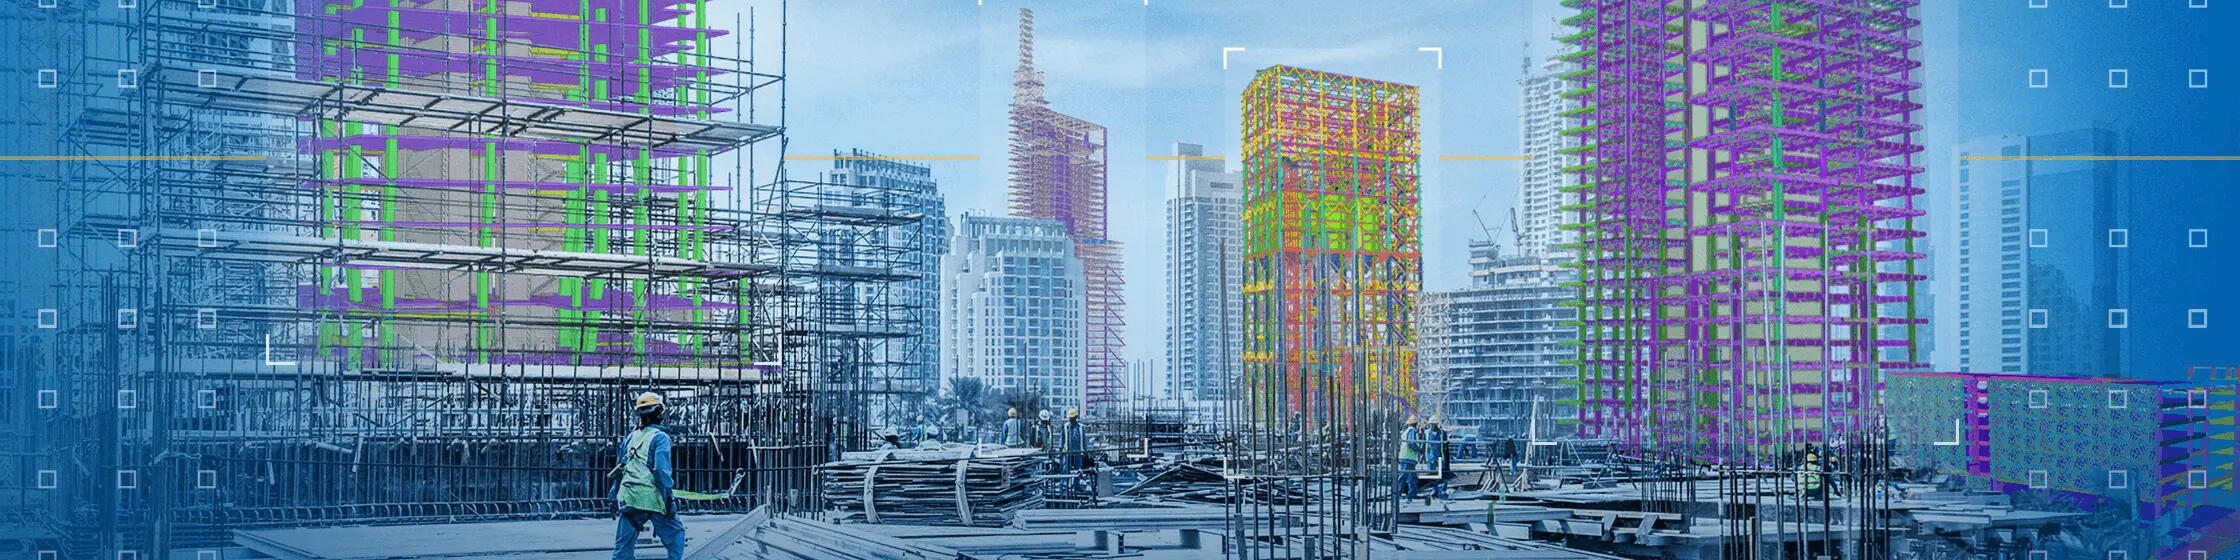 Trimble and Tekla software, showing components of buildings modelled within the skyline